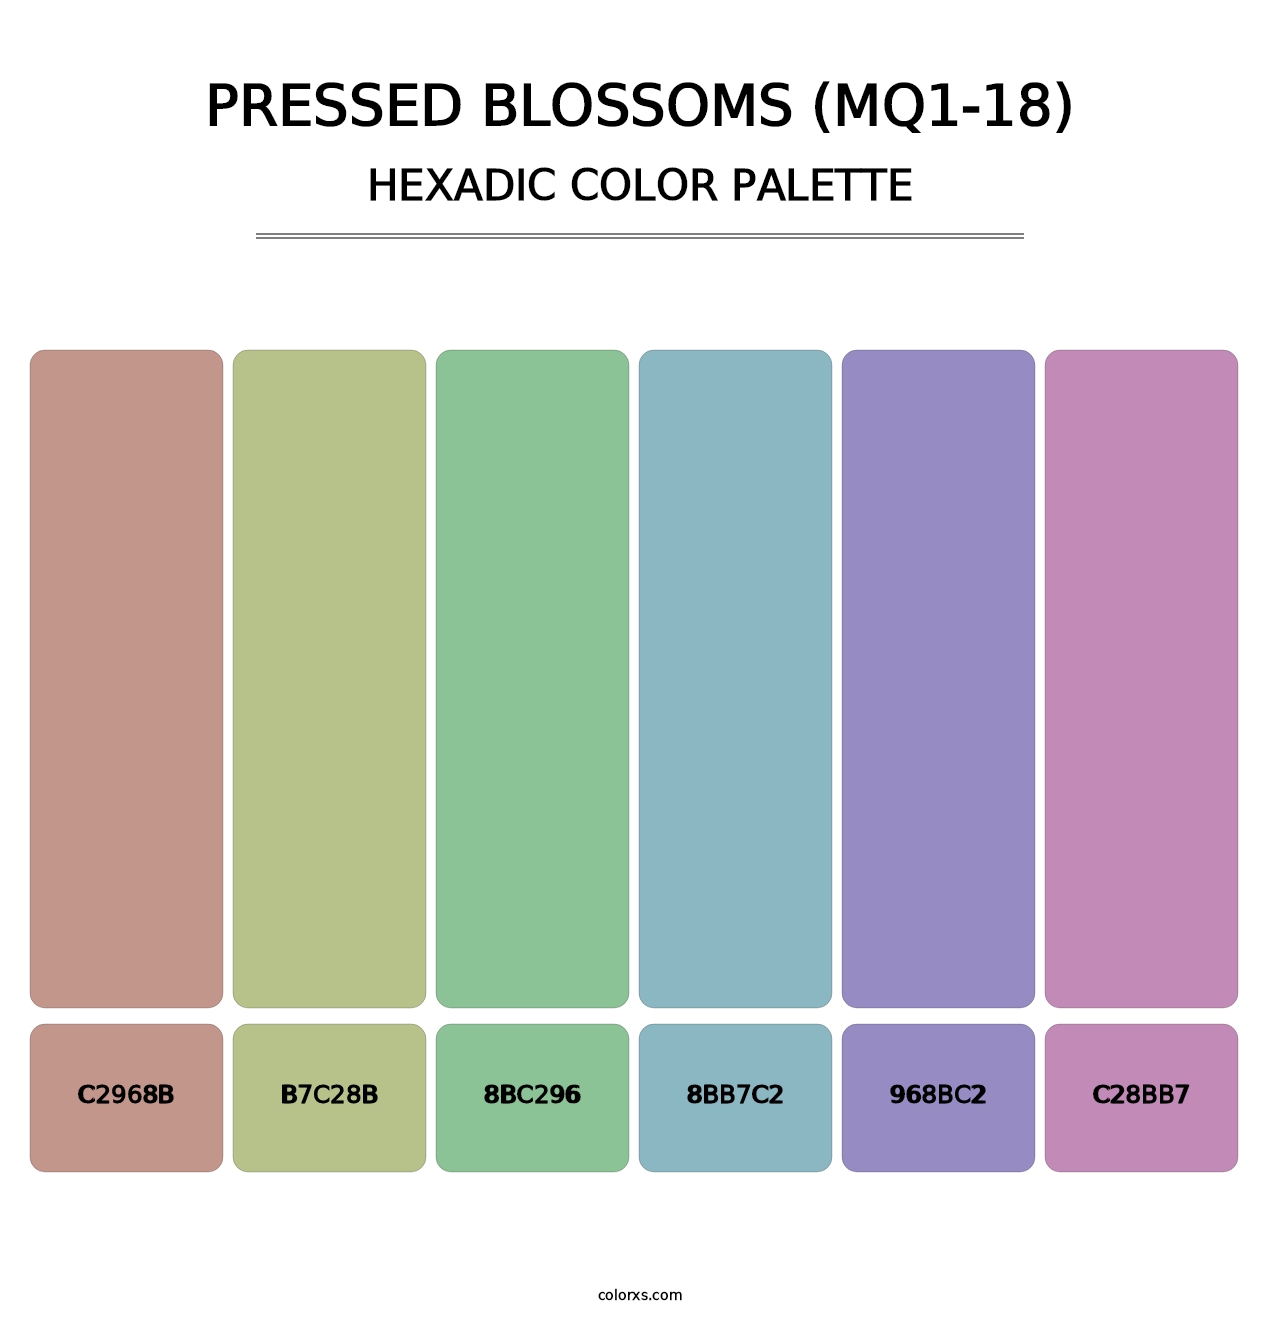 Pressed Blossoms (MQ1-18) - Hexadic Color Palette